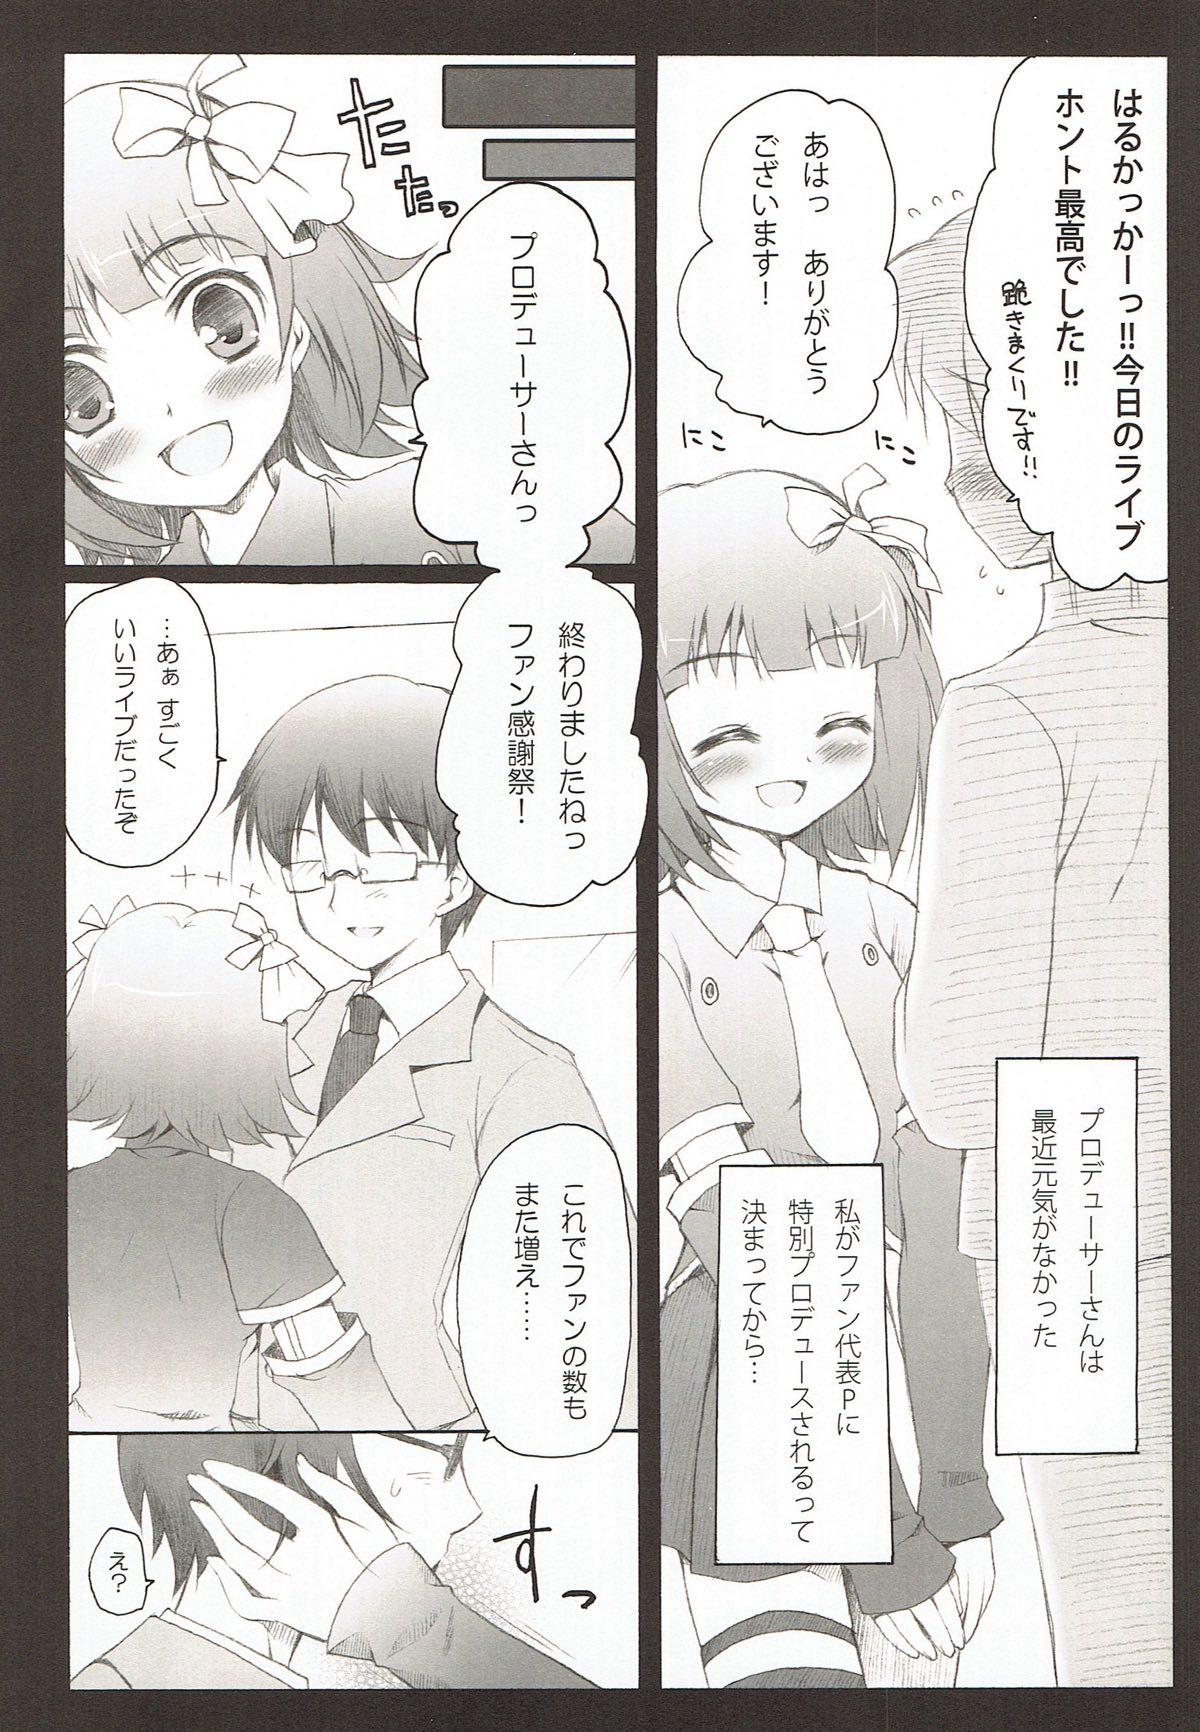 Gayclips remindfull - The idolmaster Smooth - Page 3